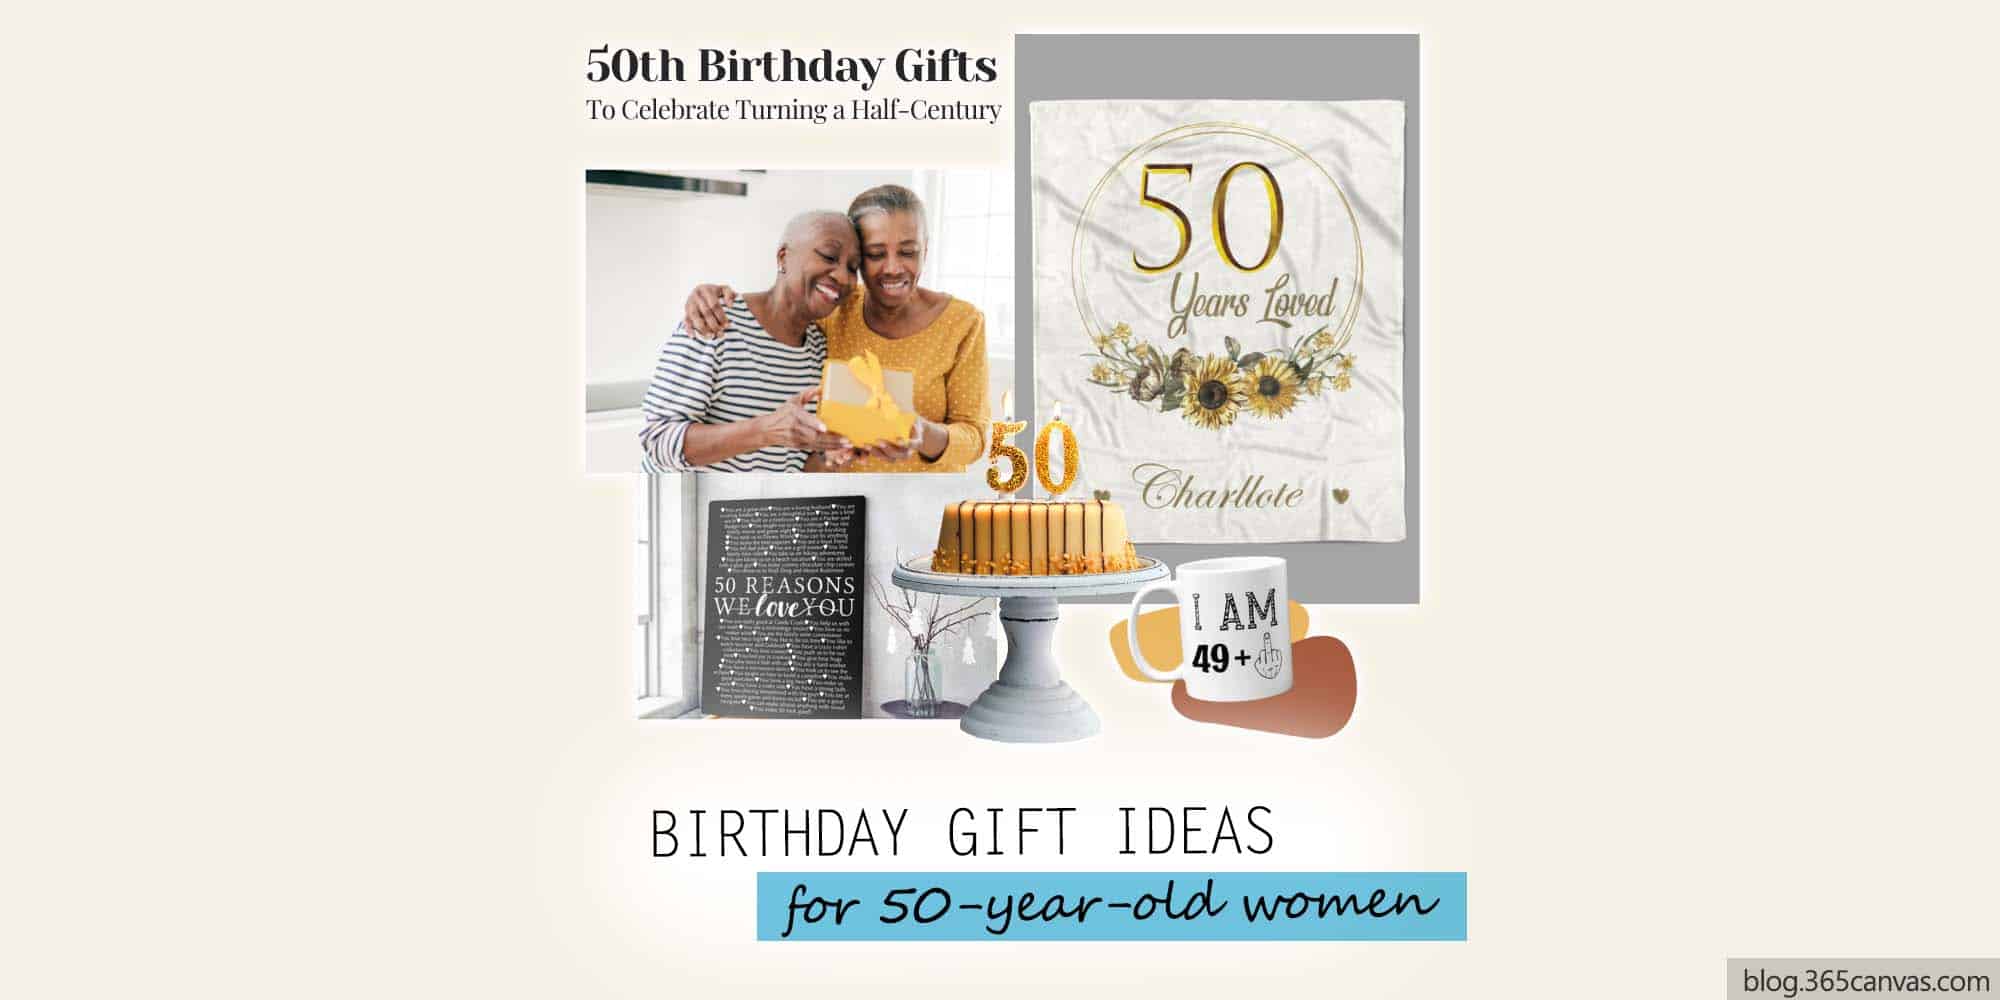 40 Best 50th Birthday Gift Ideas for Women Turning 50 (2023) - 365Canvas Blog